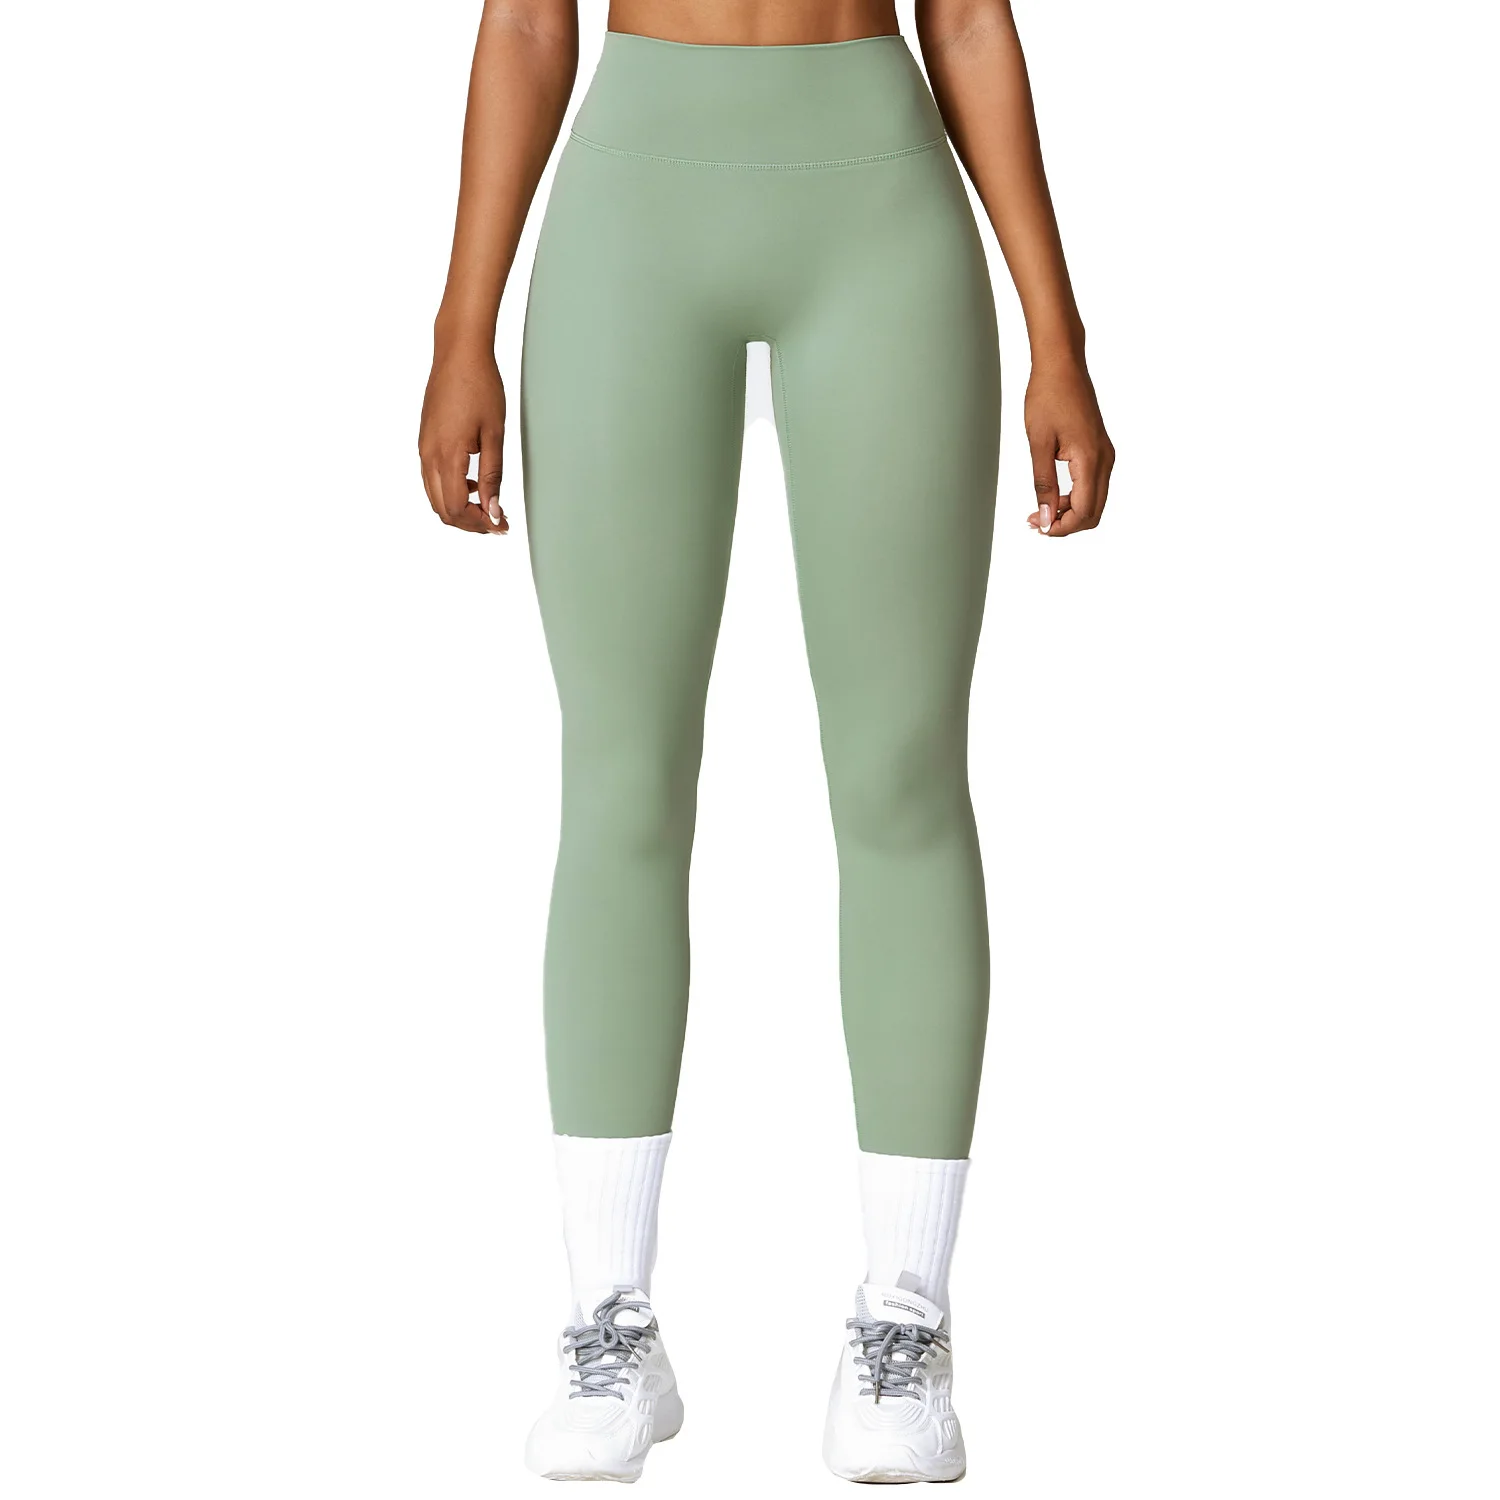 

Women's Fitness Leggings Stretchy Yoga Leggings for Women with Moisture-wicking Fabric High Waist and Butt-lifting Design